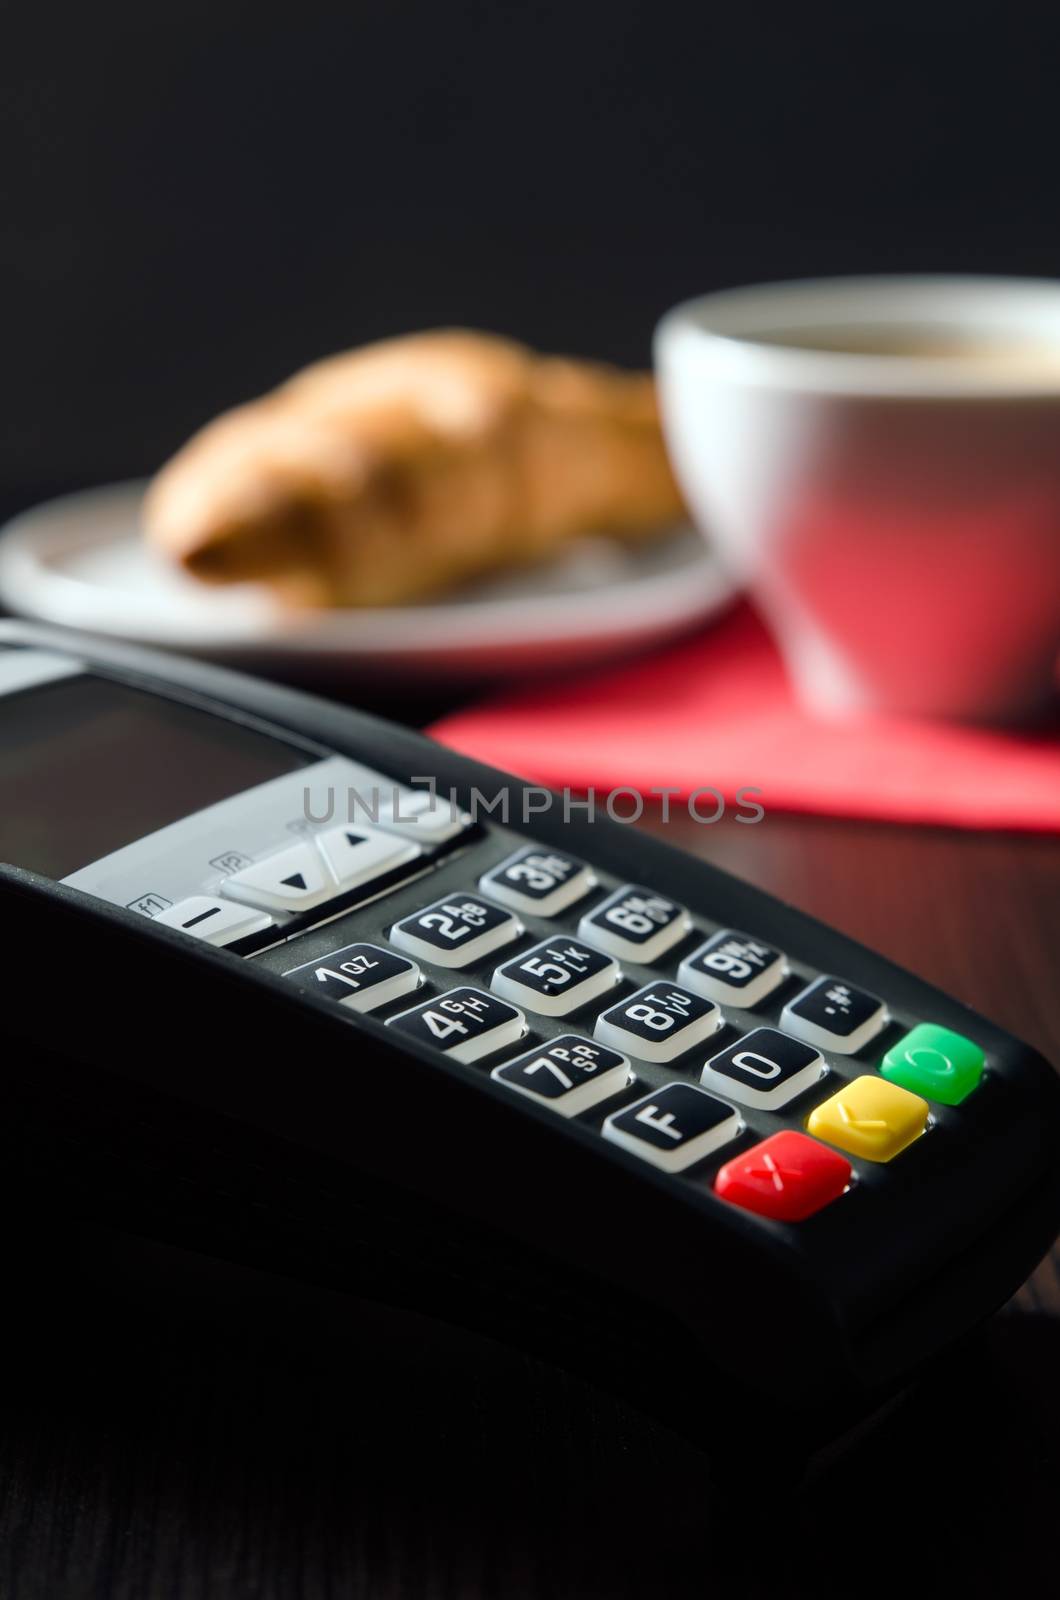 Credit card payment terminal for sale in restaurant by simpson33